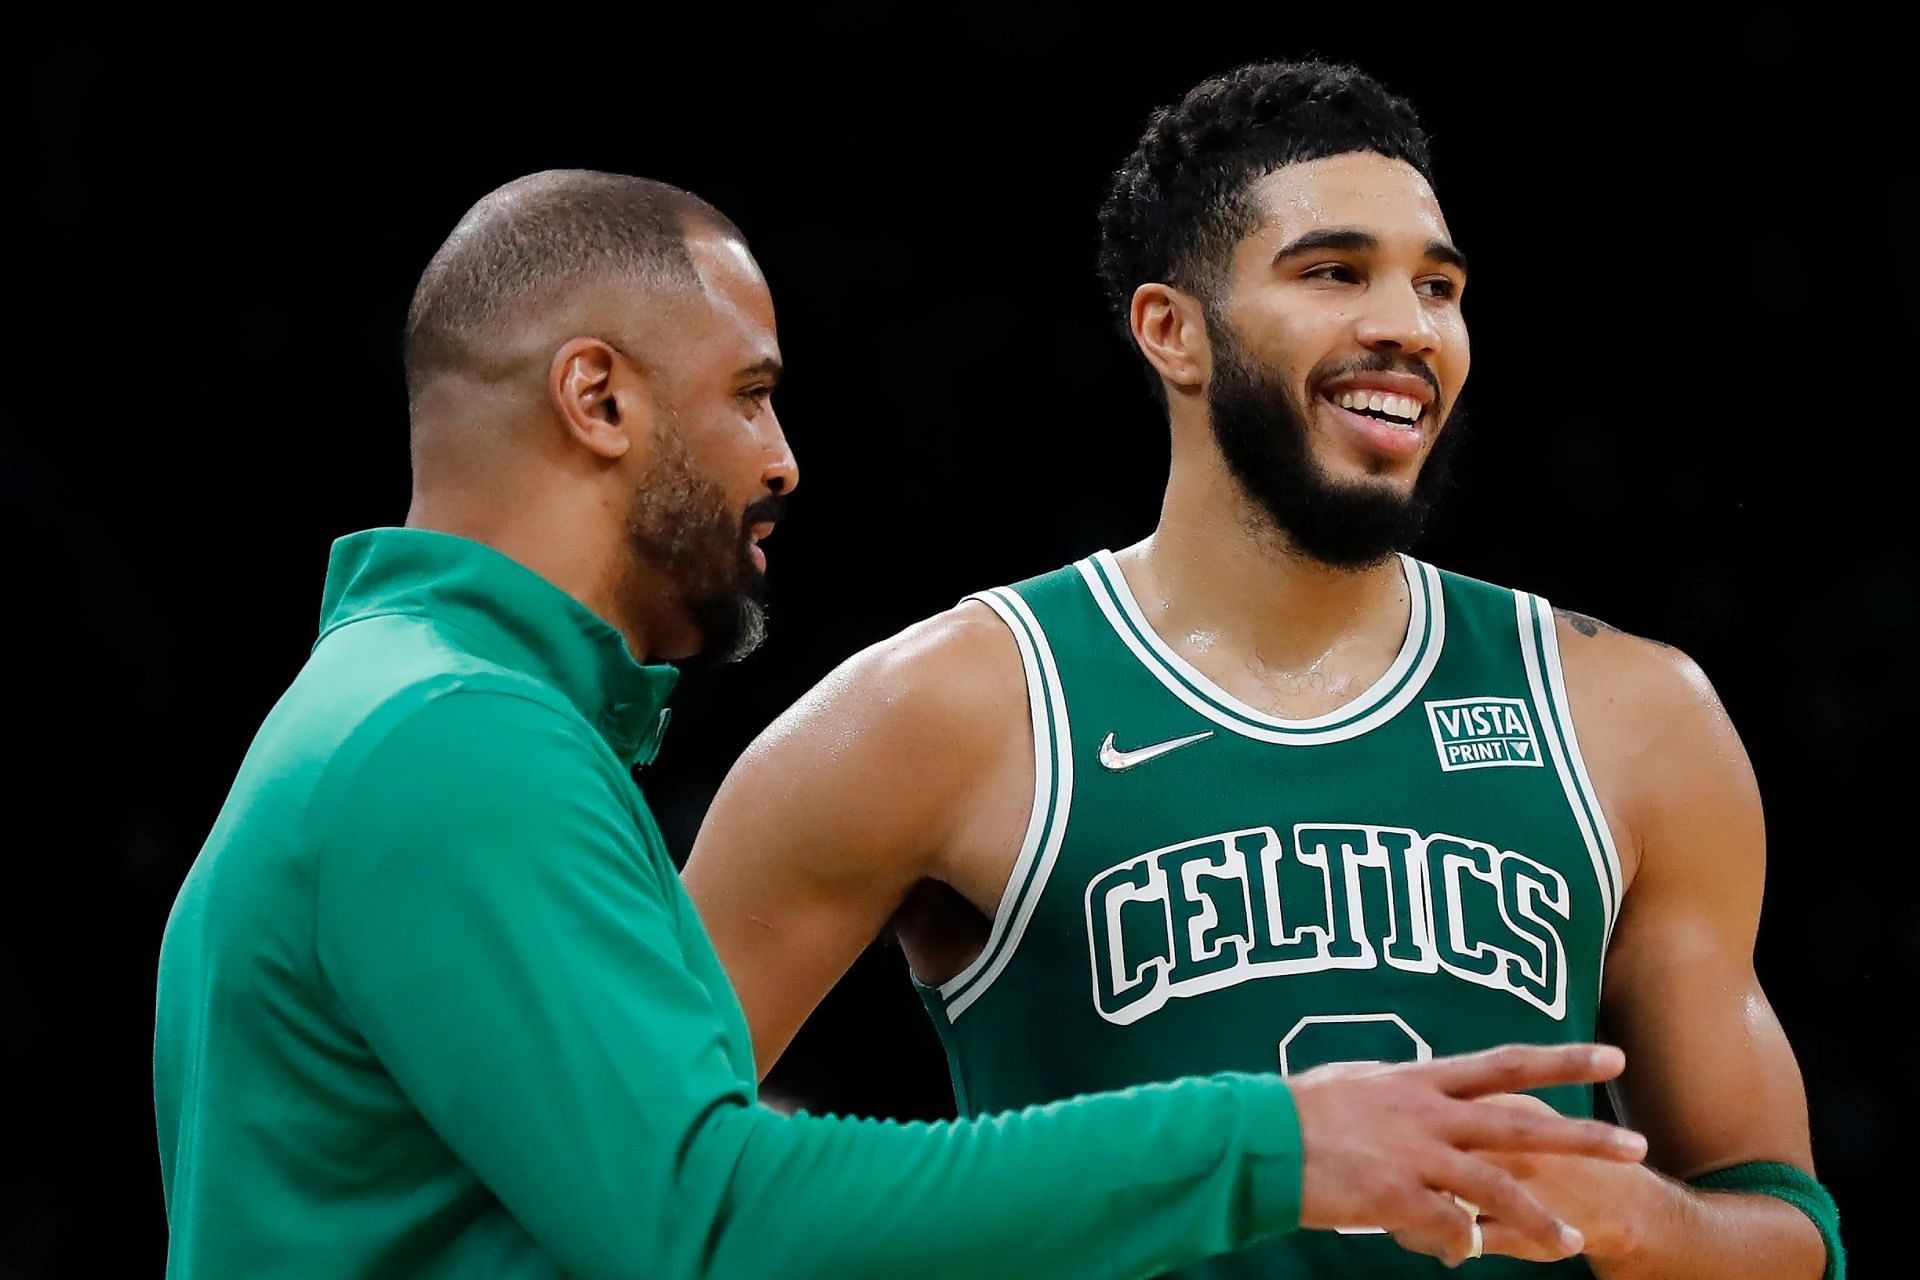 New Boston Celtics head coach Ime Udoka and All-Star Jayson Tatum have formed a bond that&#039;s made the team stronger and more resilient. [Photo: Boston.com]